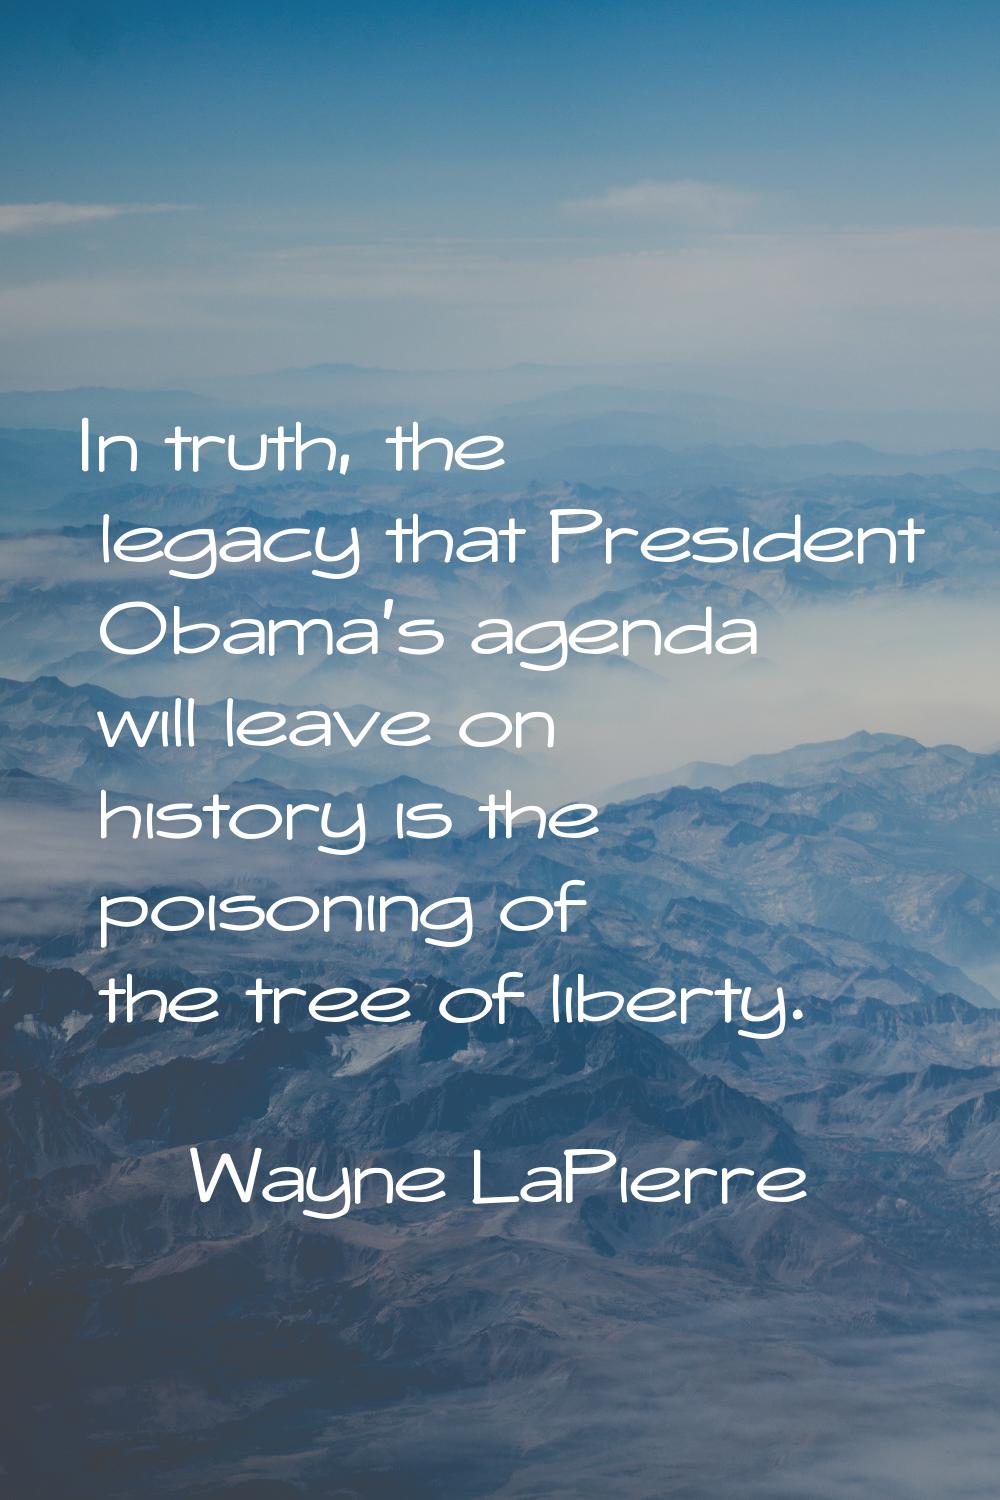 In truth, the legacy that President Obama's agenda will leave on history is the poisoning of the tr